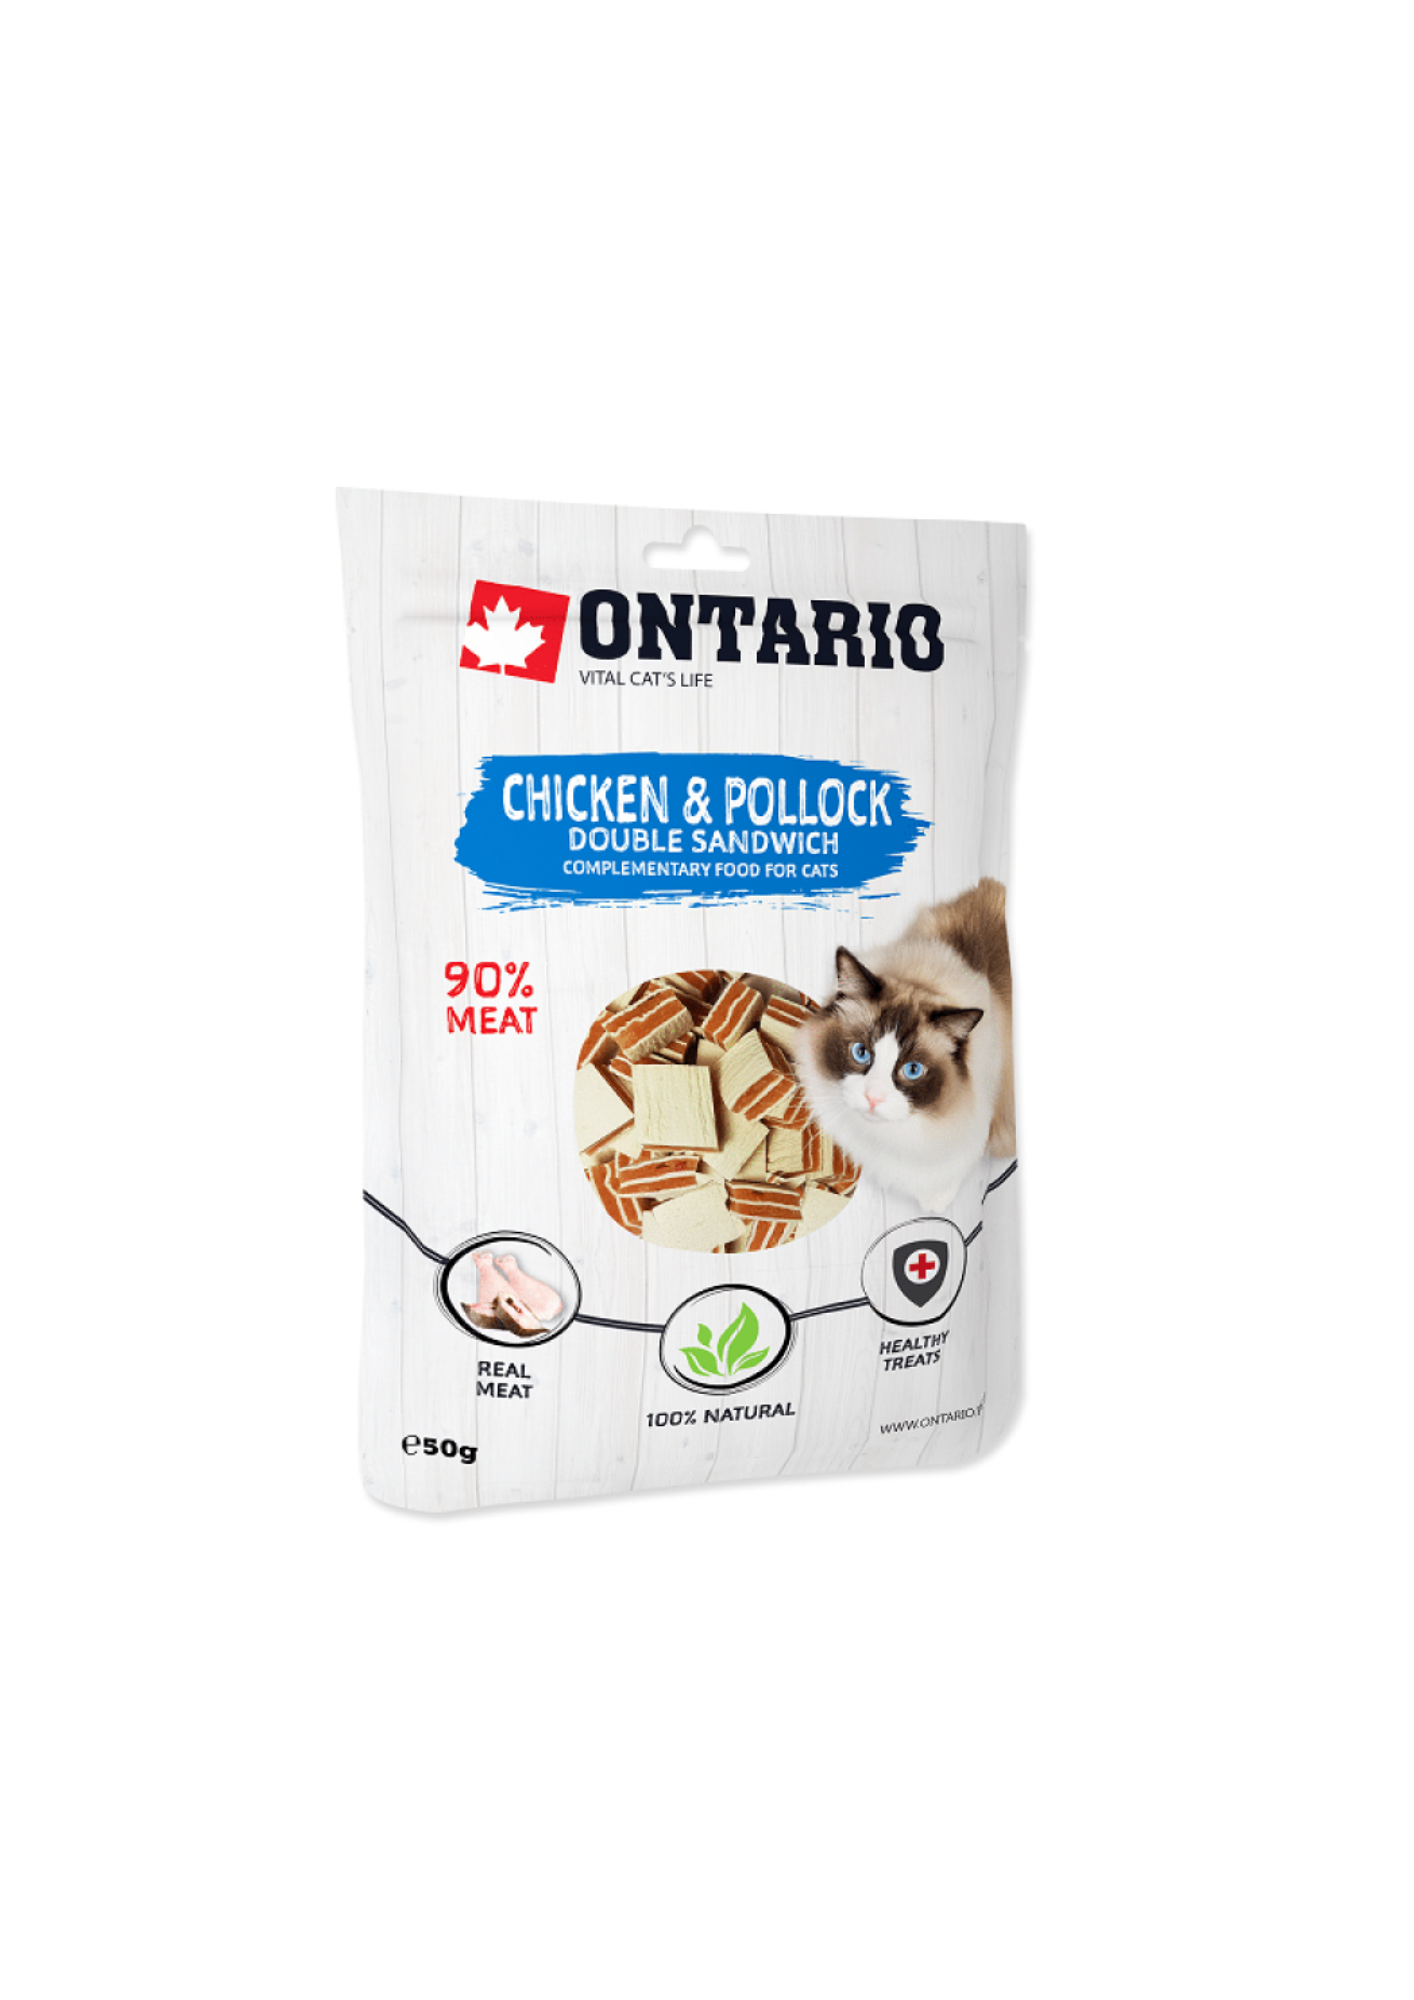 Ontario Cat Treats with Chicken and Pollock Double Sandwich, 50 g